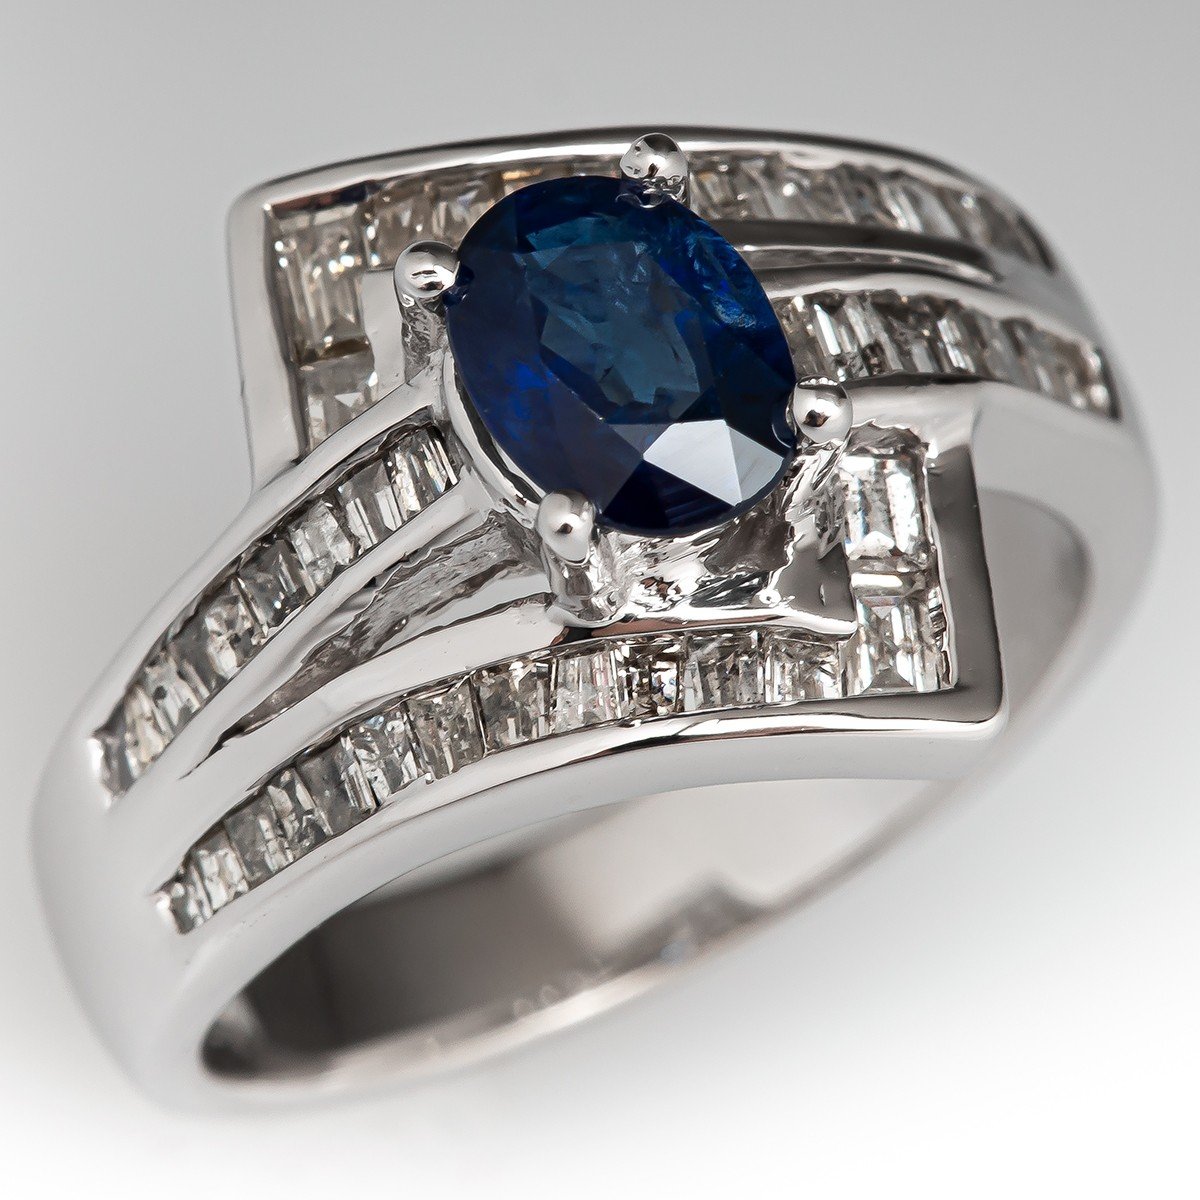 Untreated Blue Sapphire Ring set with White & Yellow Diamonds | Exquisite  Jewelry for Every Occasion | FWCJ